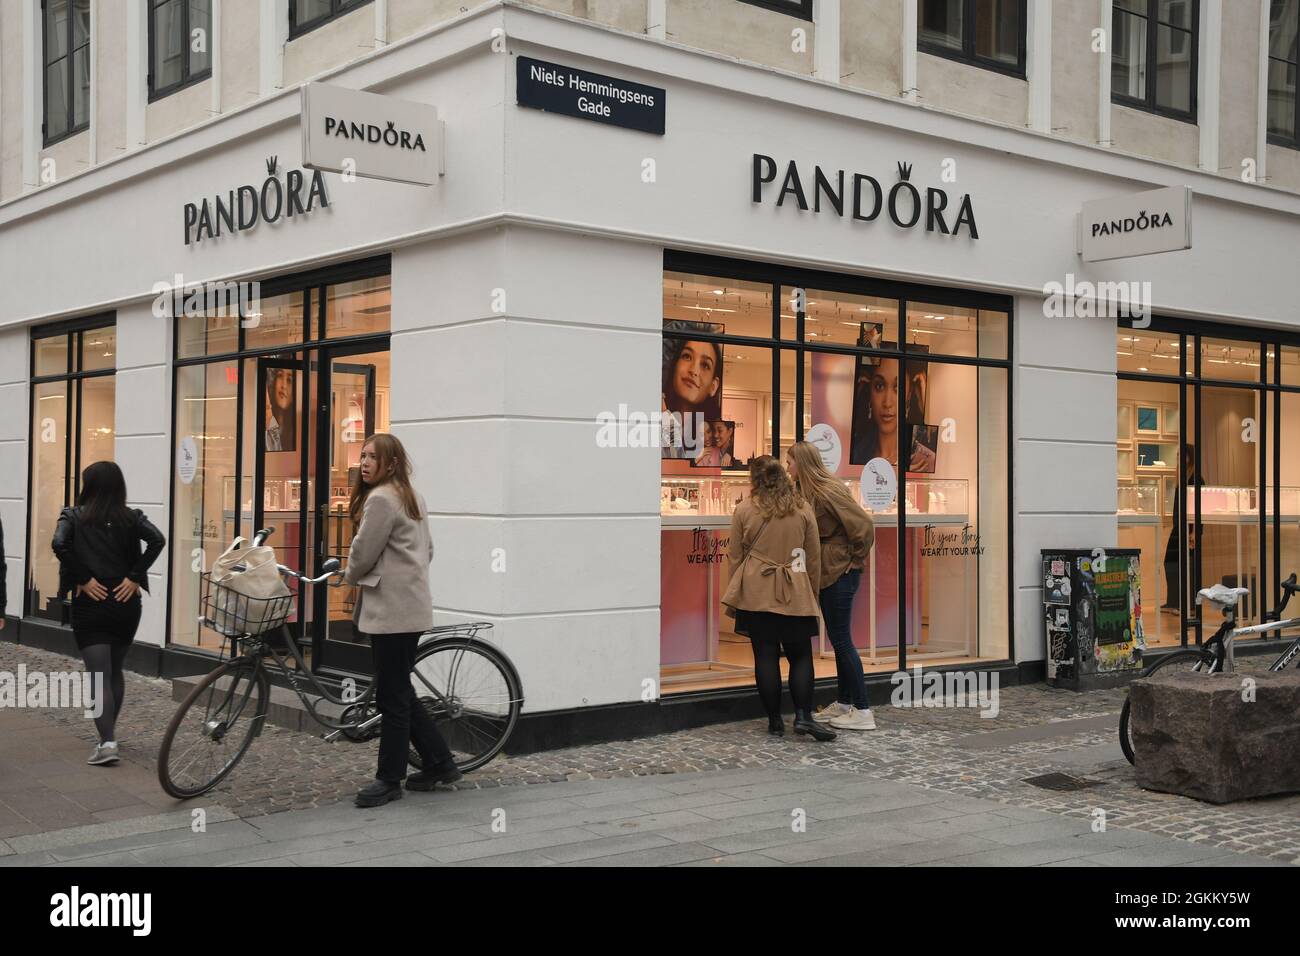 Pandora Store Window High Resolution Stock Photography and Images - Alamy